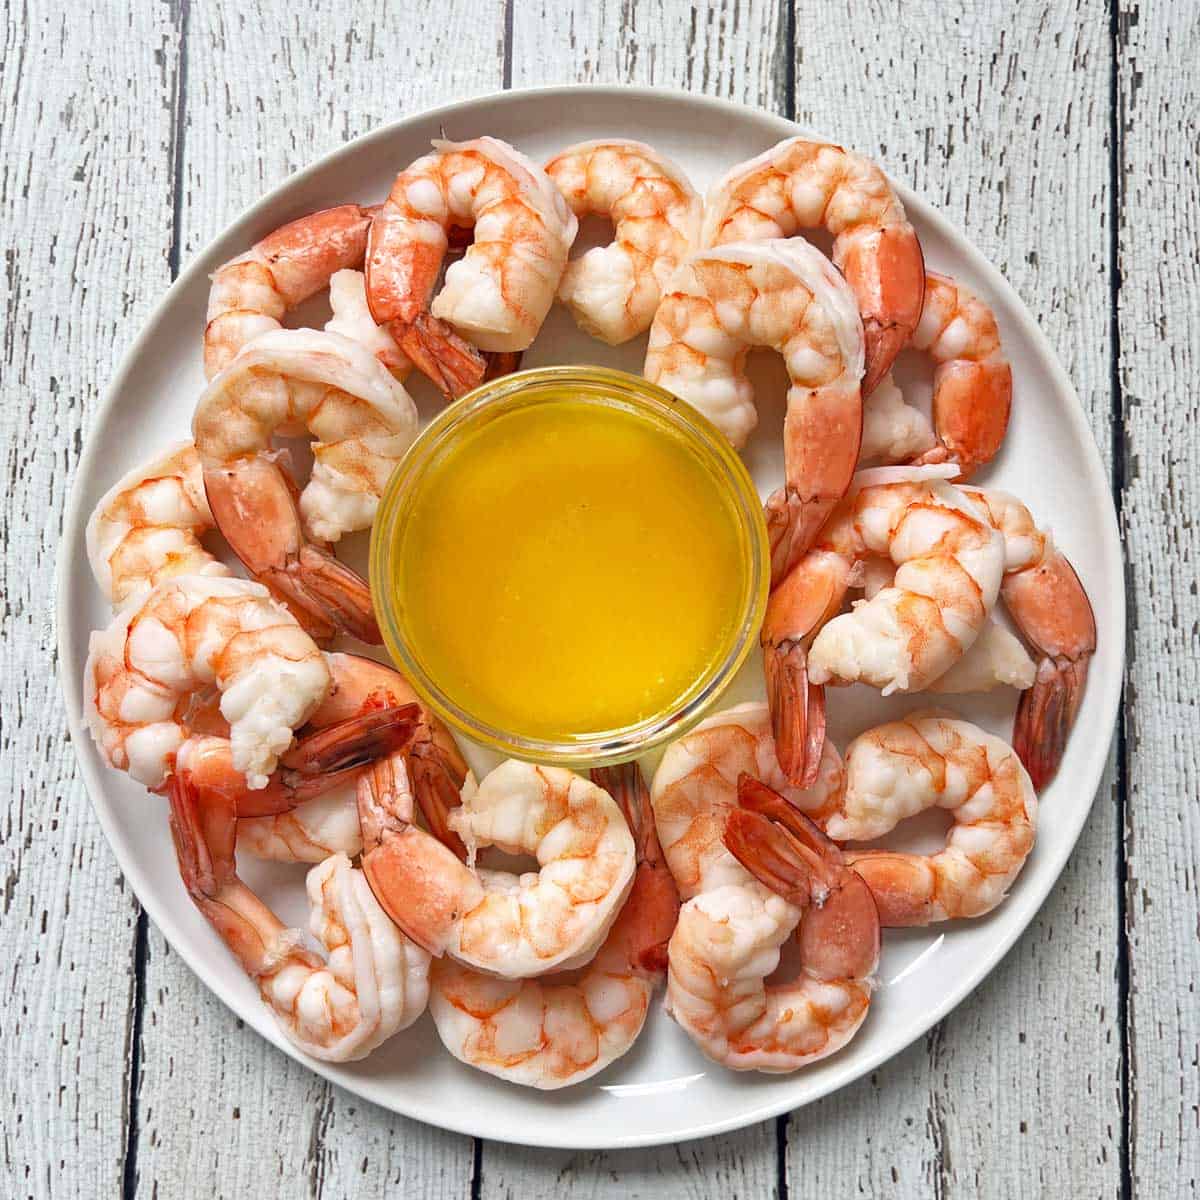 Boiled shrimp are served with melted butter.